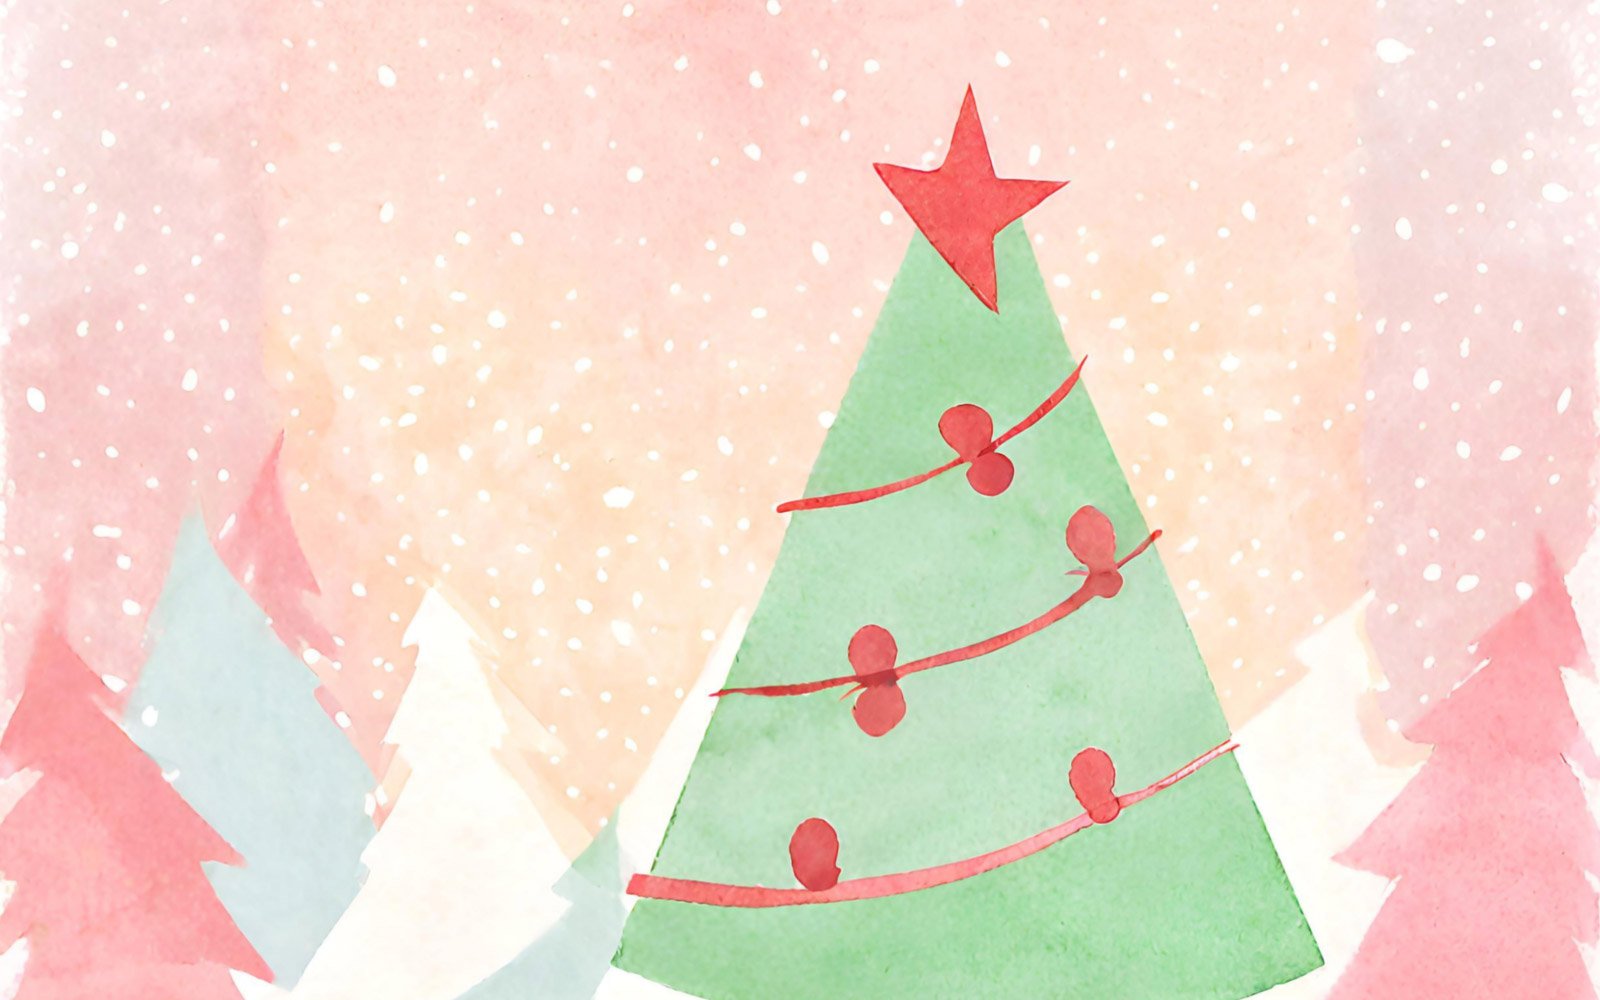 Watercolor Christmas background with fir tree and snowflakes. Vector illustration